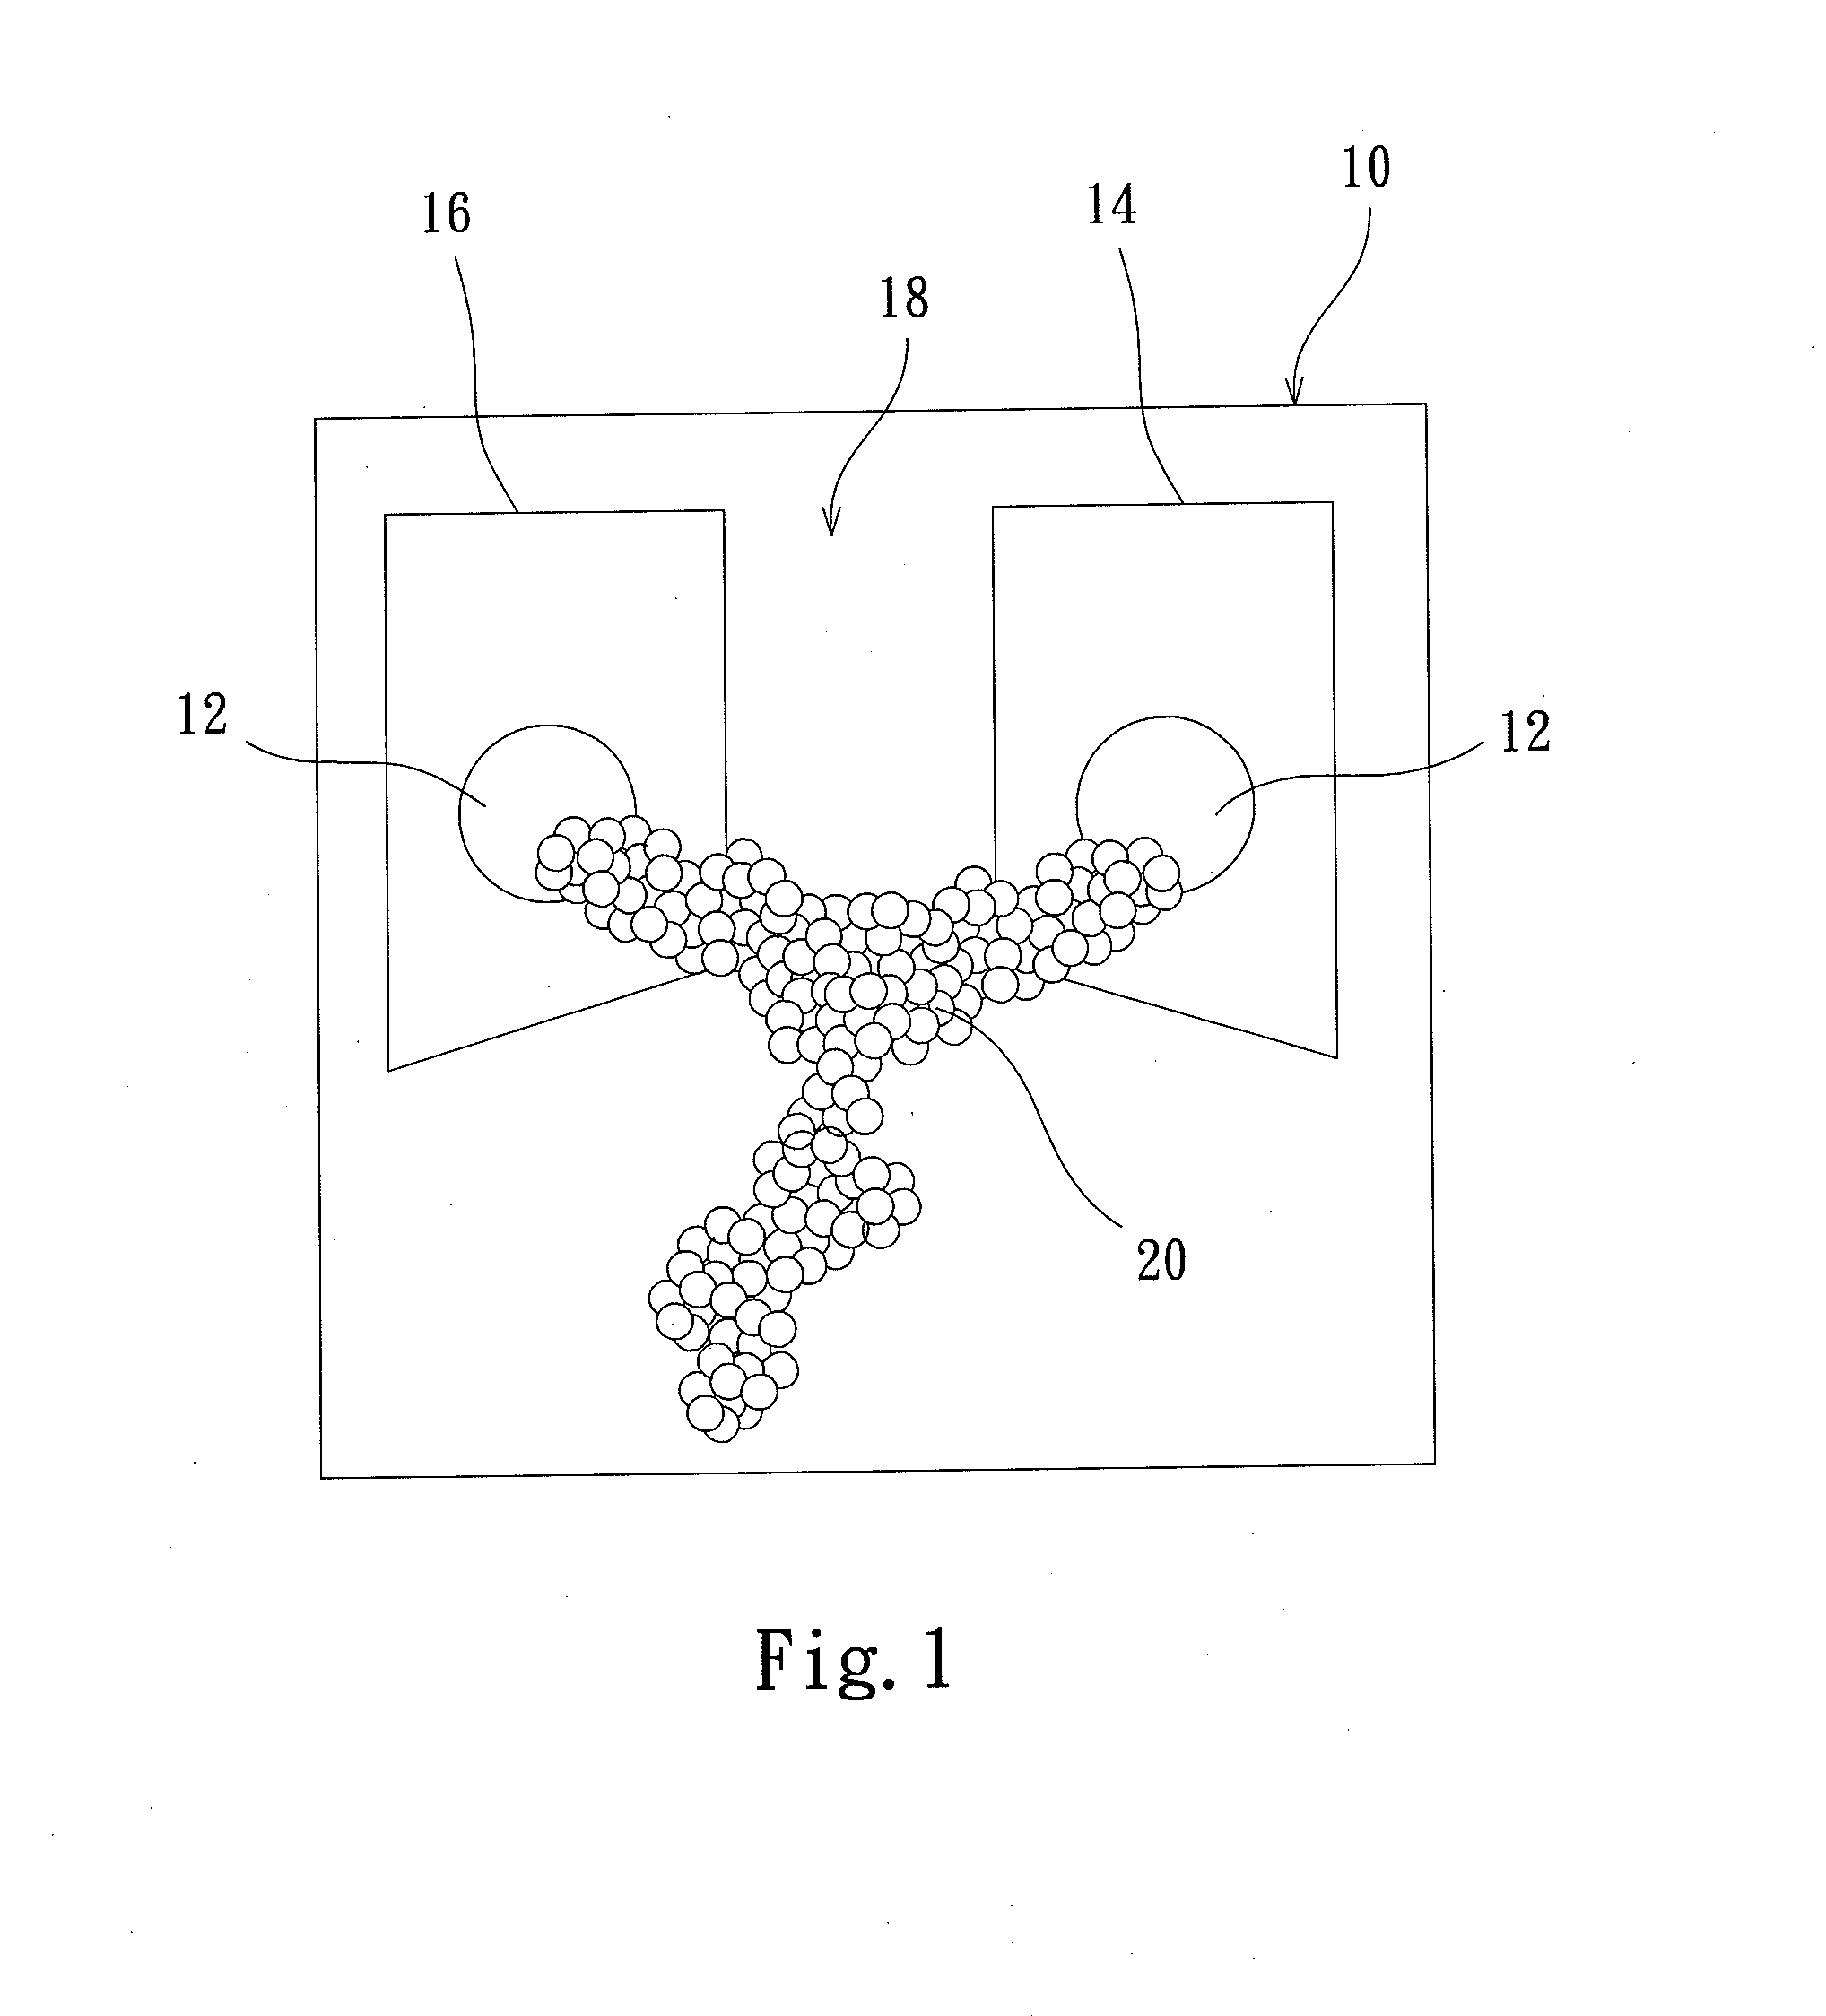 Protein transistor device